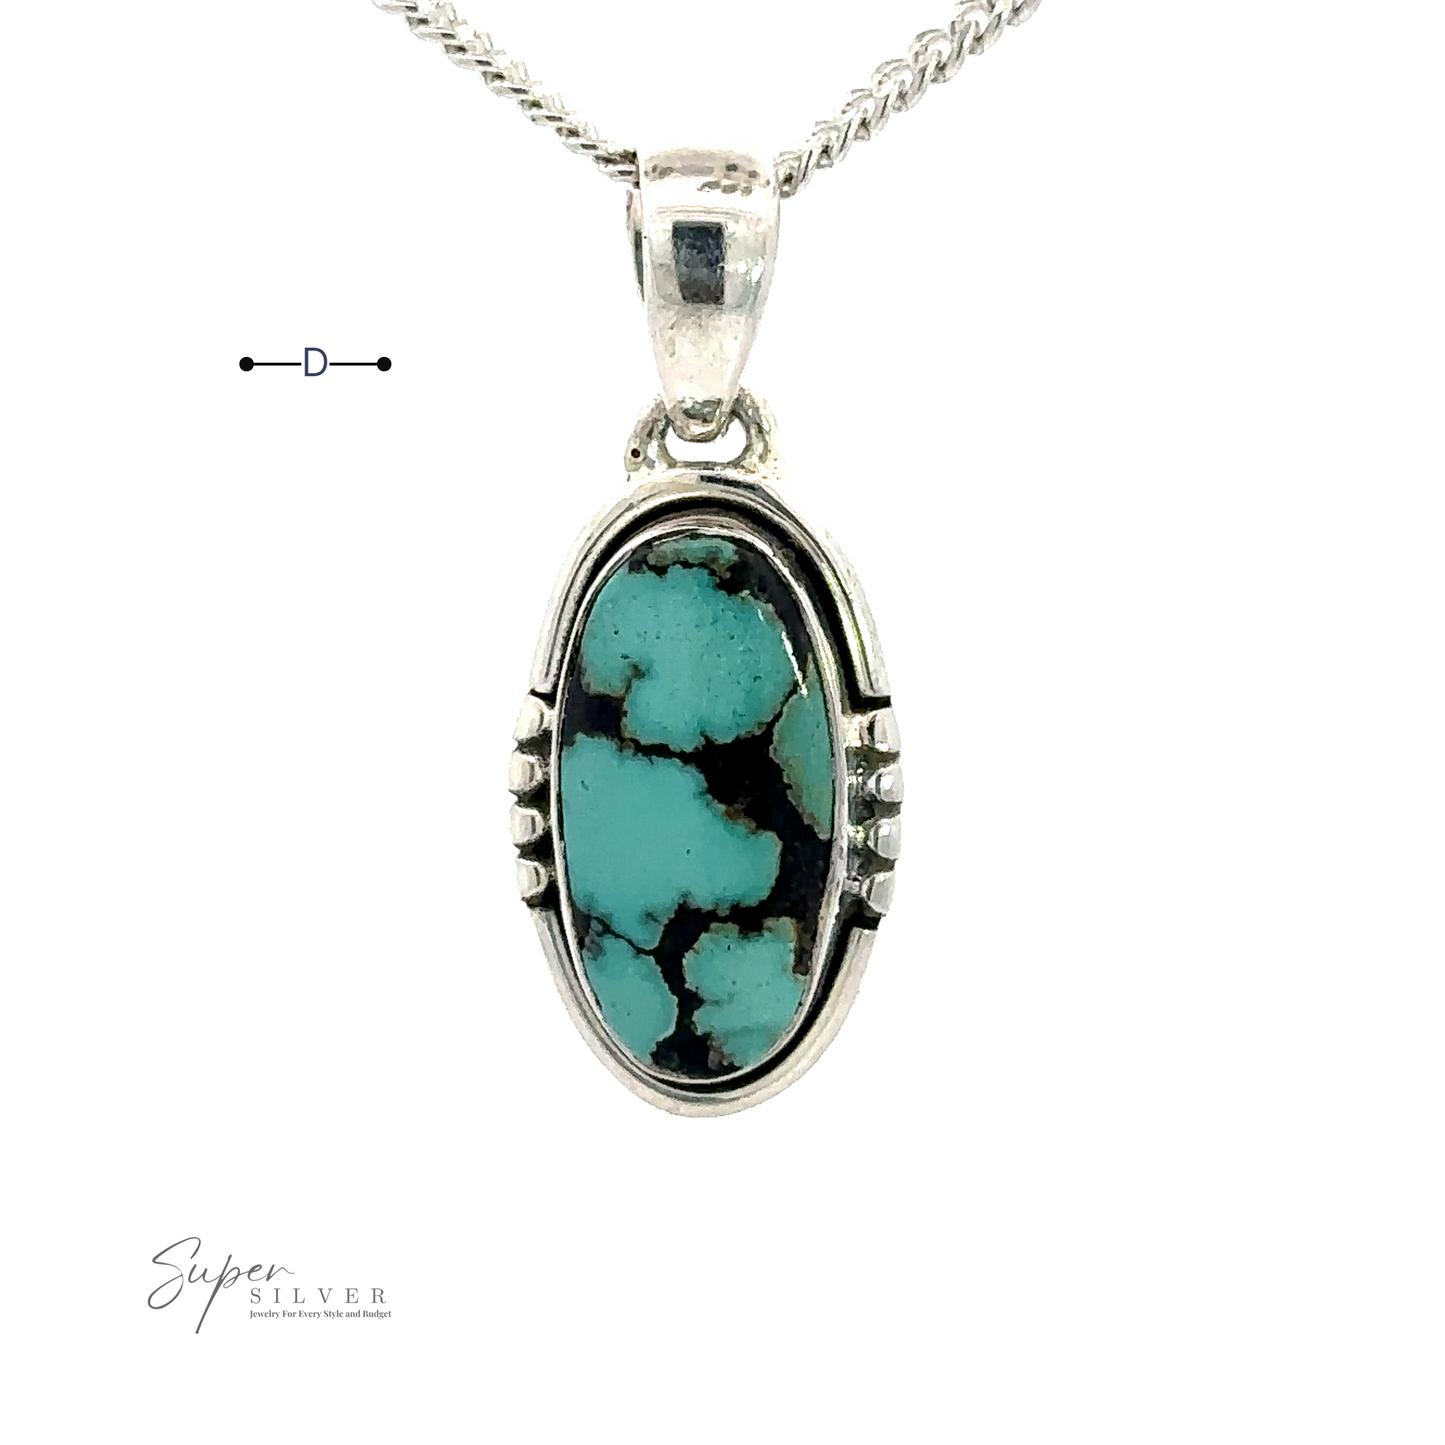 
                  
                    A handmade sterling silver necklace with a Natural Turquoise Elongated Oval Pendant featuring black matrix patterns. The Natural Turquoise Elongated Oval Pendant has decorative silver accents on the sides.
                  
                